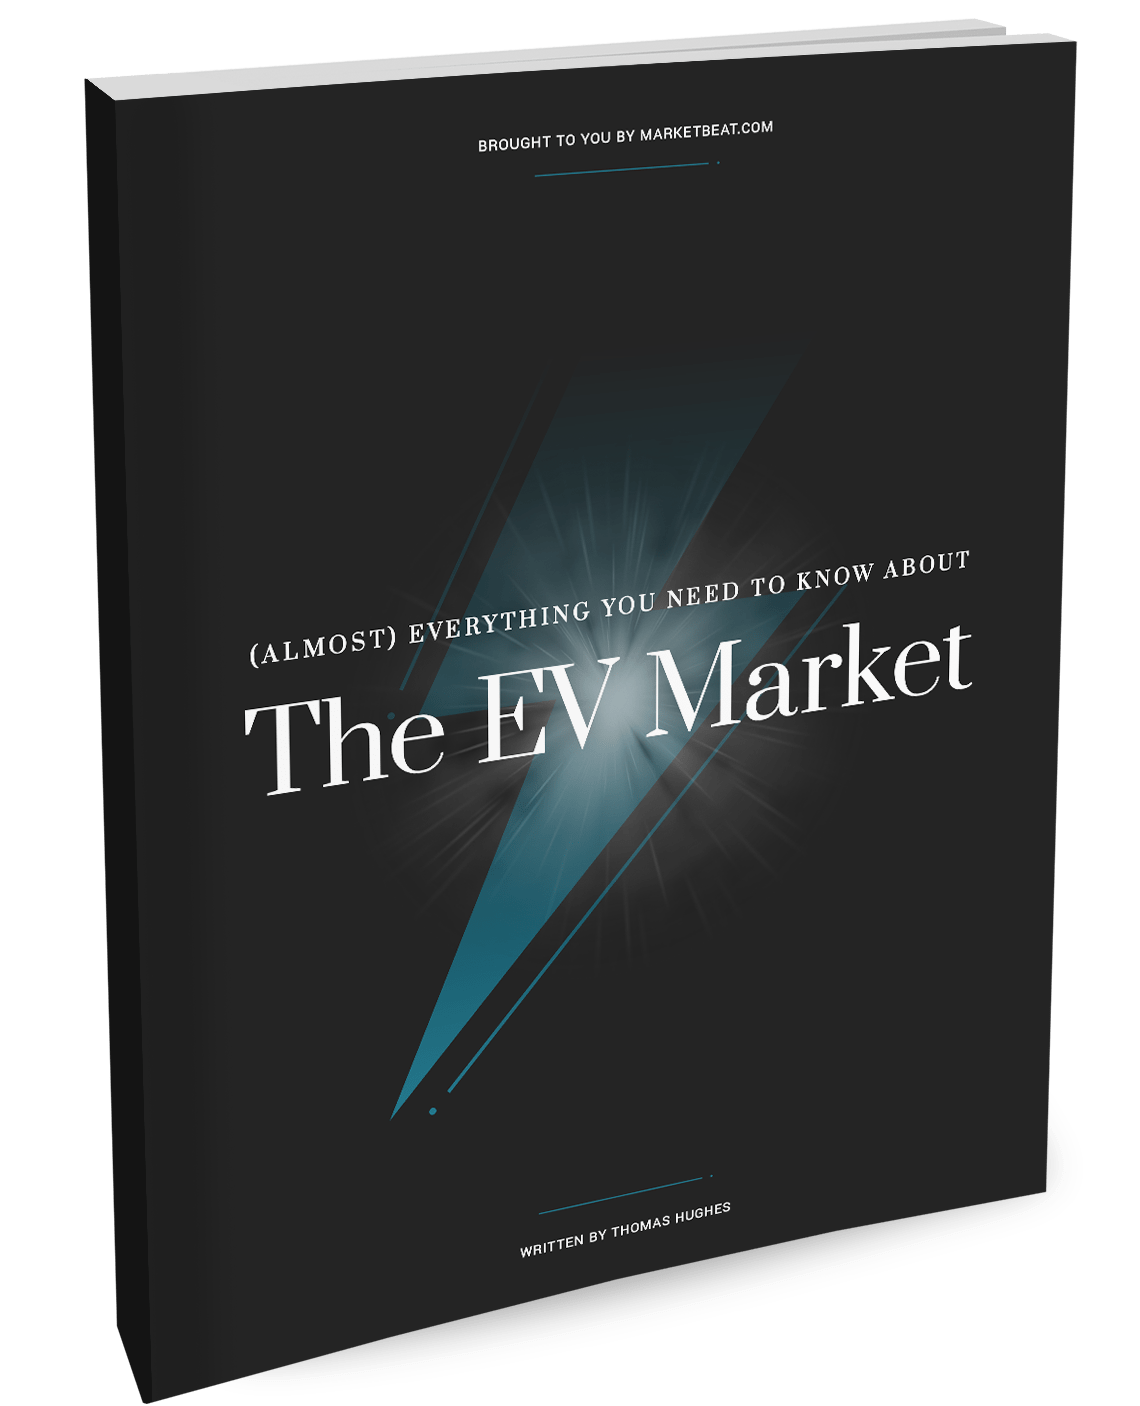 (Almost) Everything You Need to Know About Covering the EV Market